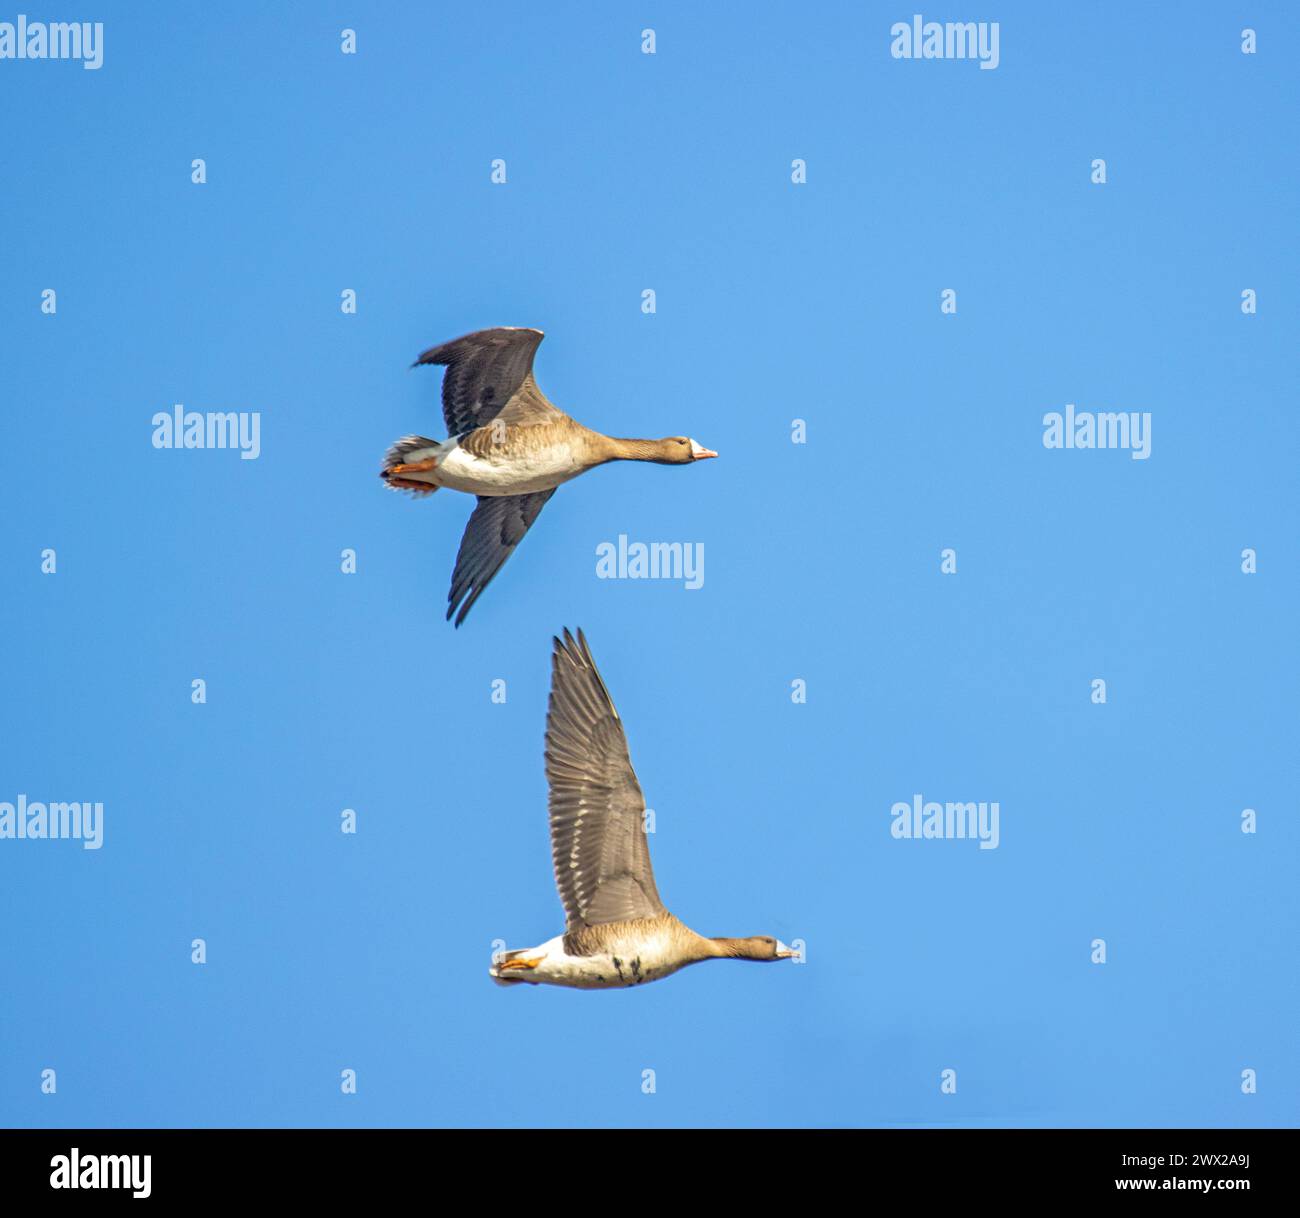 Couple of White-fronted goose (Anser albifrons), migrating geese in the sky. European migration stop-overs, Birds fly full-face, rocketing Stock Photo